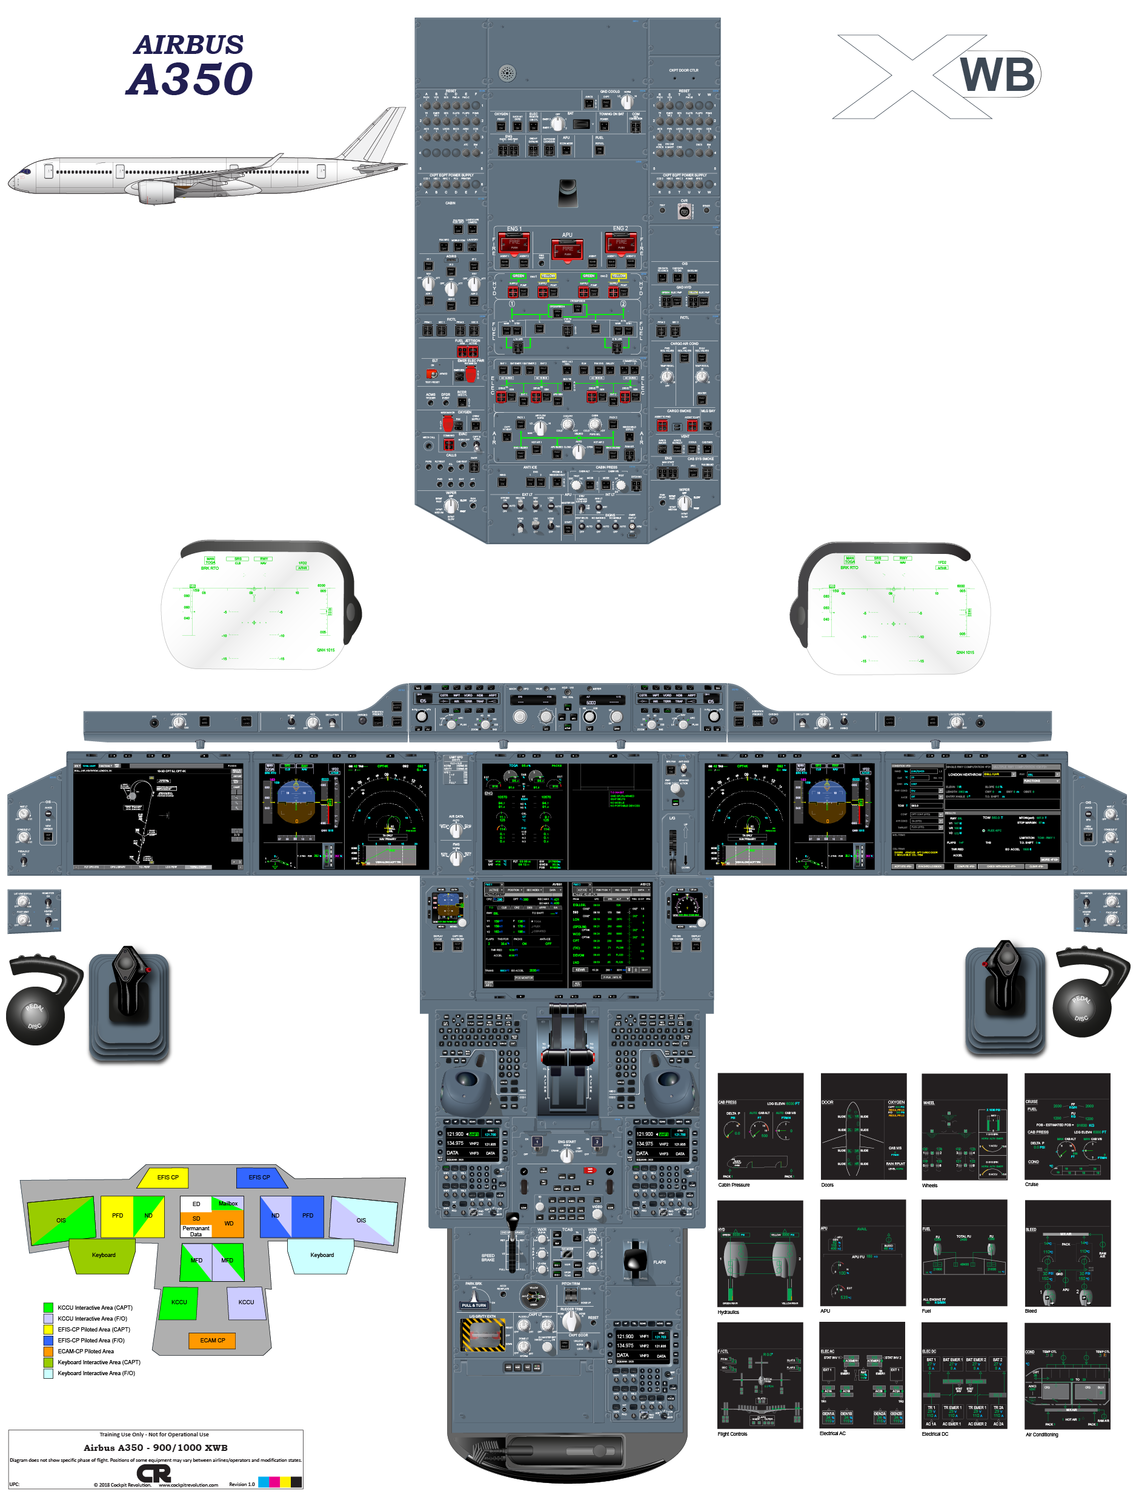 Airbus A350 Cockpit Poster